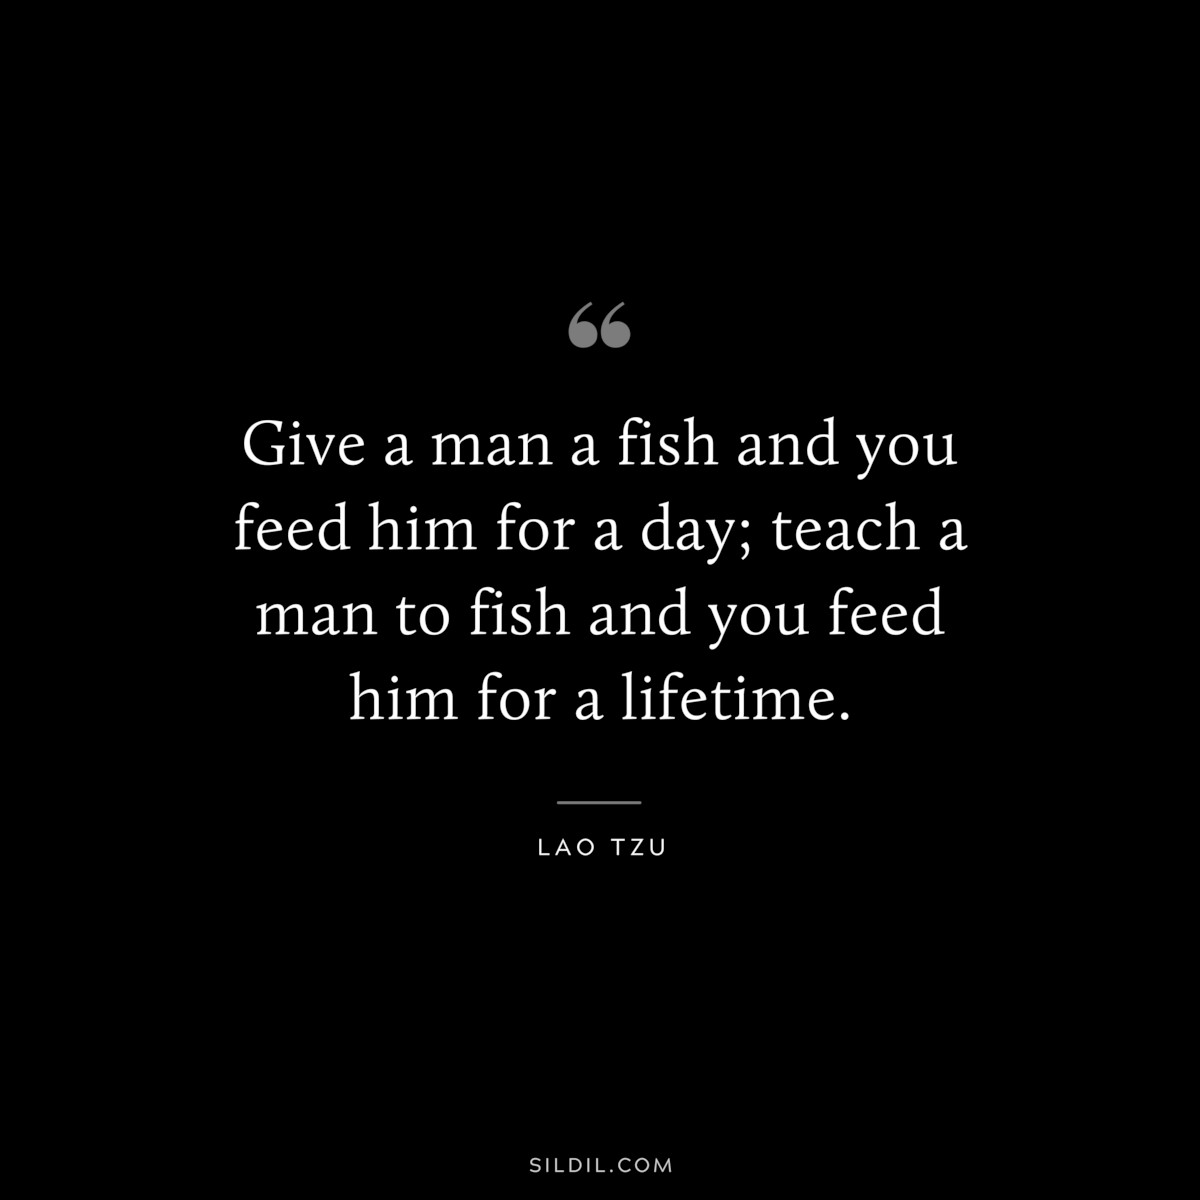 Give a man a fish and you feed him for a day; teach a man to fish and you feed him for a lifetime. ― Lao Tzu